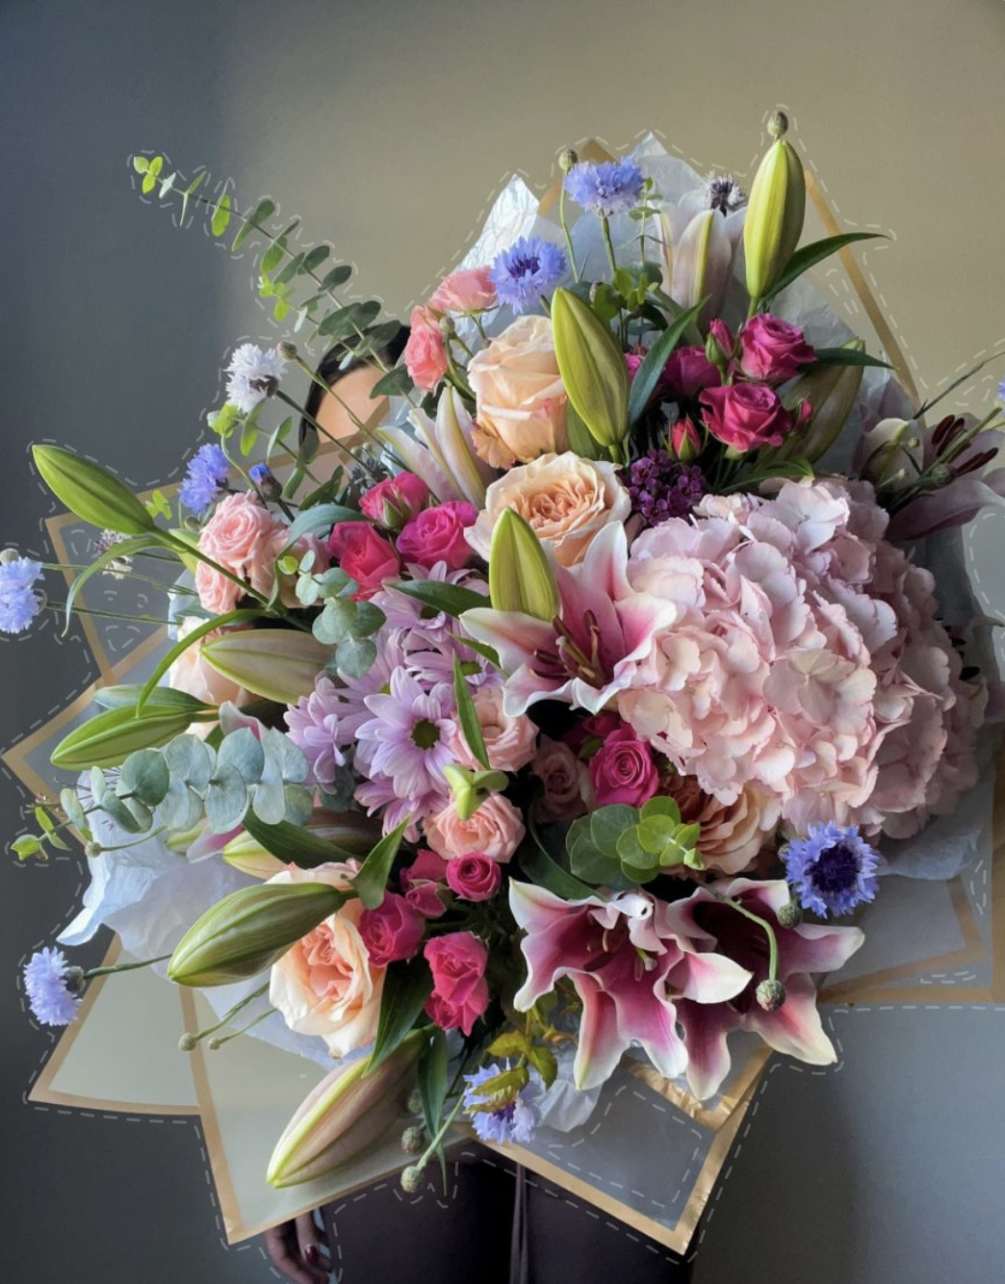 The impressive bouquet of mixed flowers is a stunning arrangement that combines